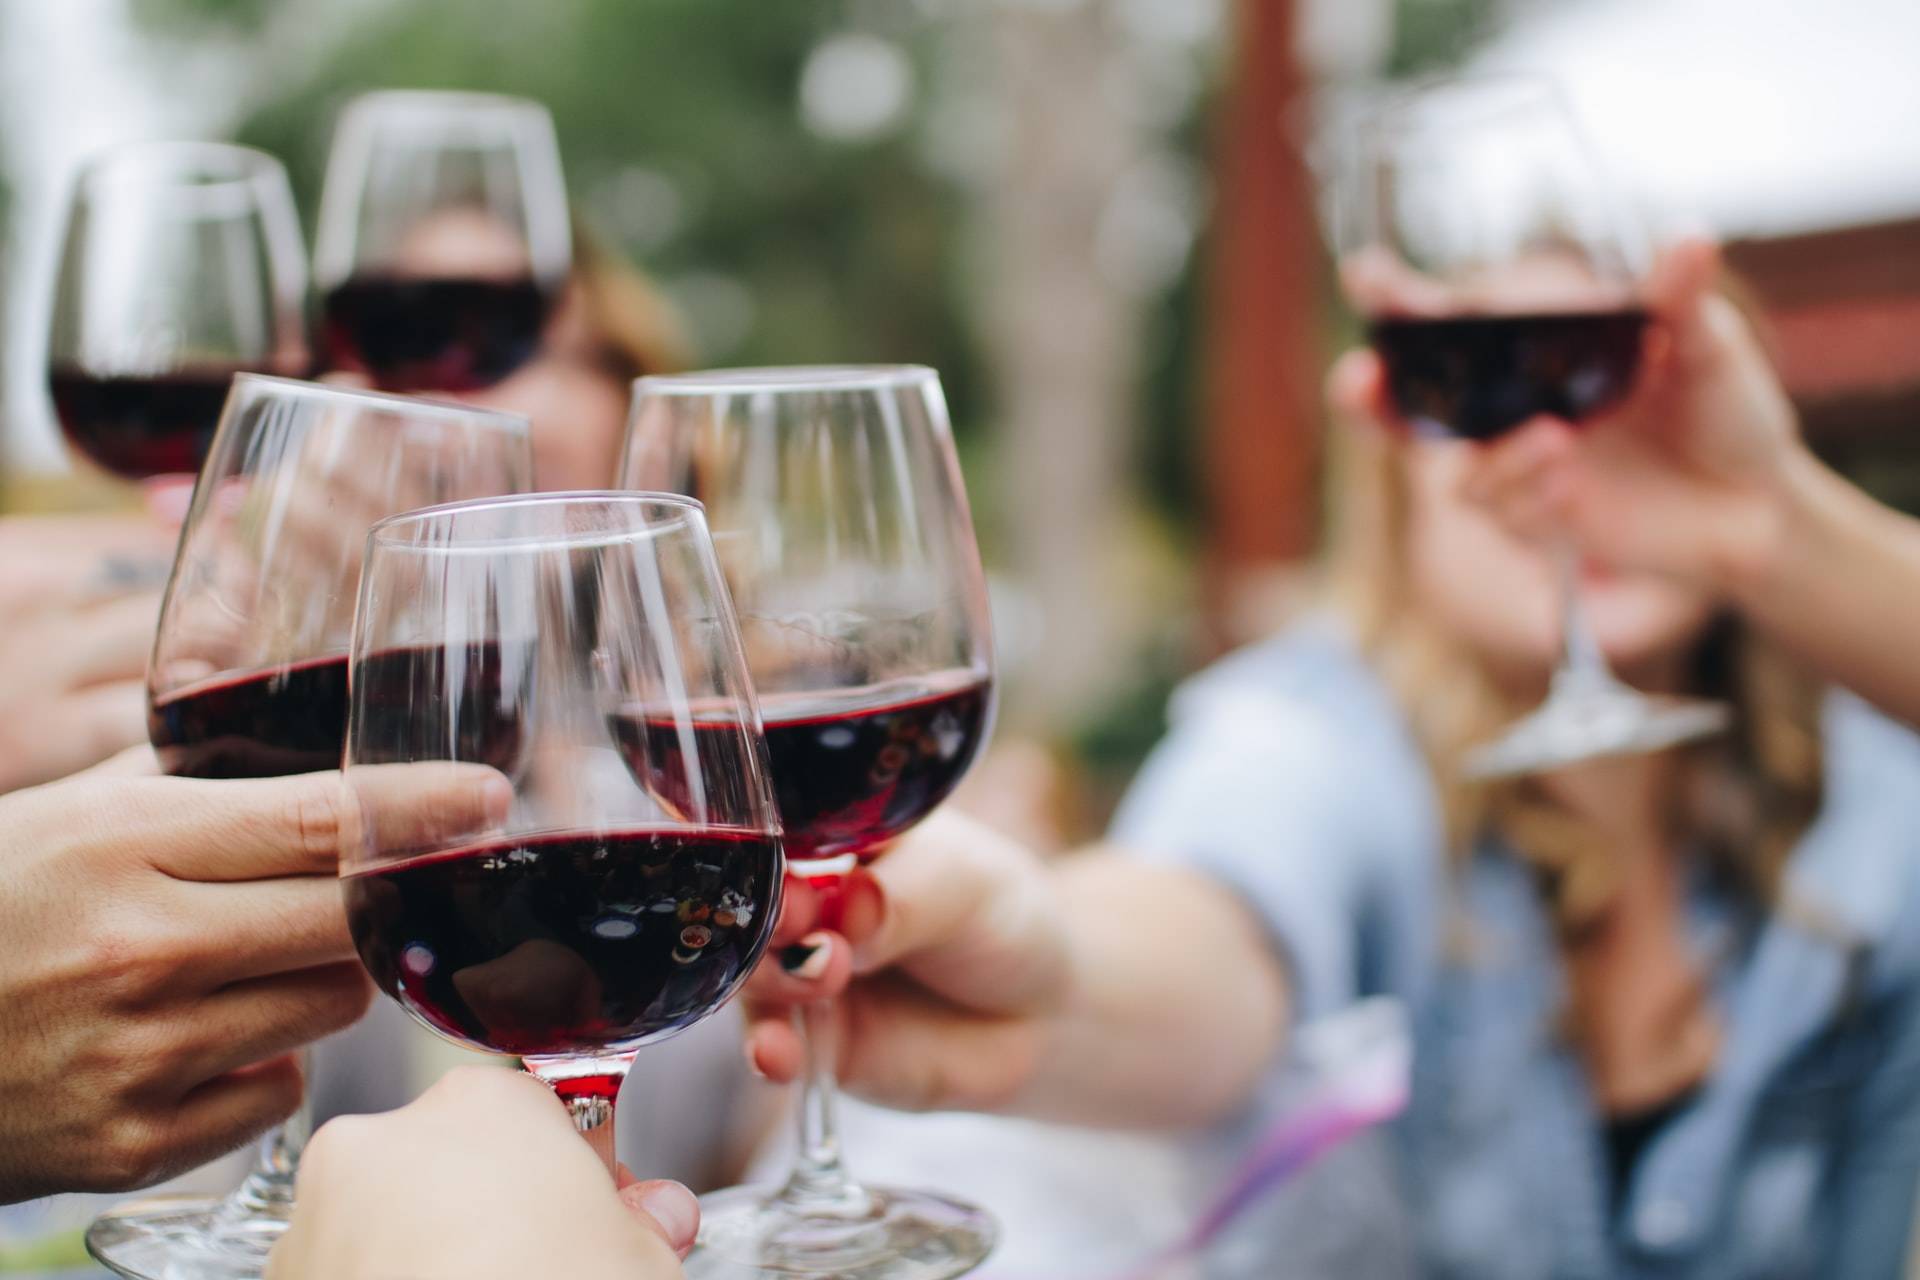 English wine and food festival 2021 - London Airport Transfers